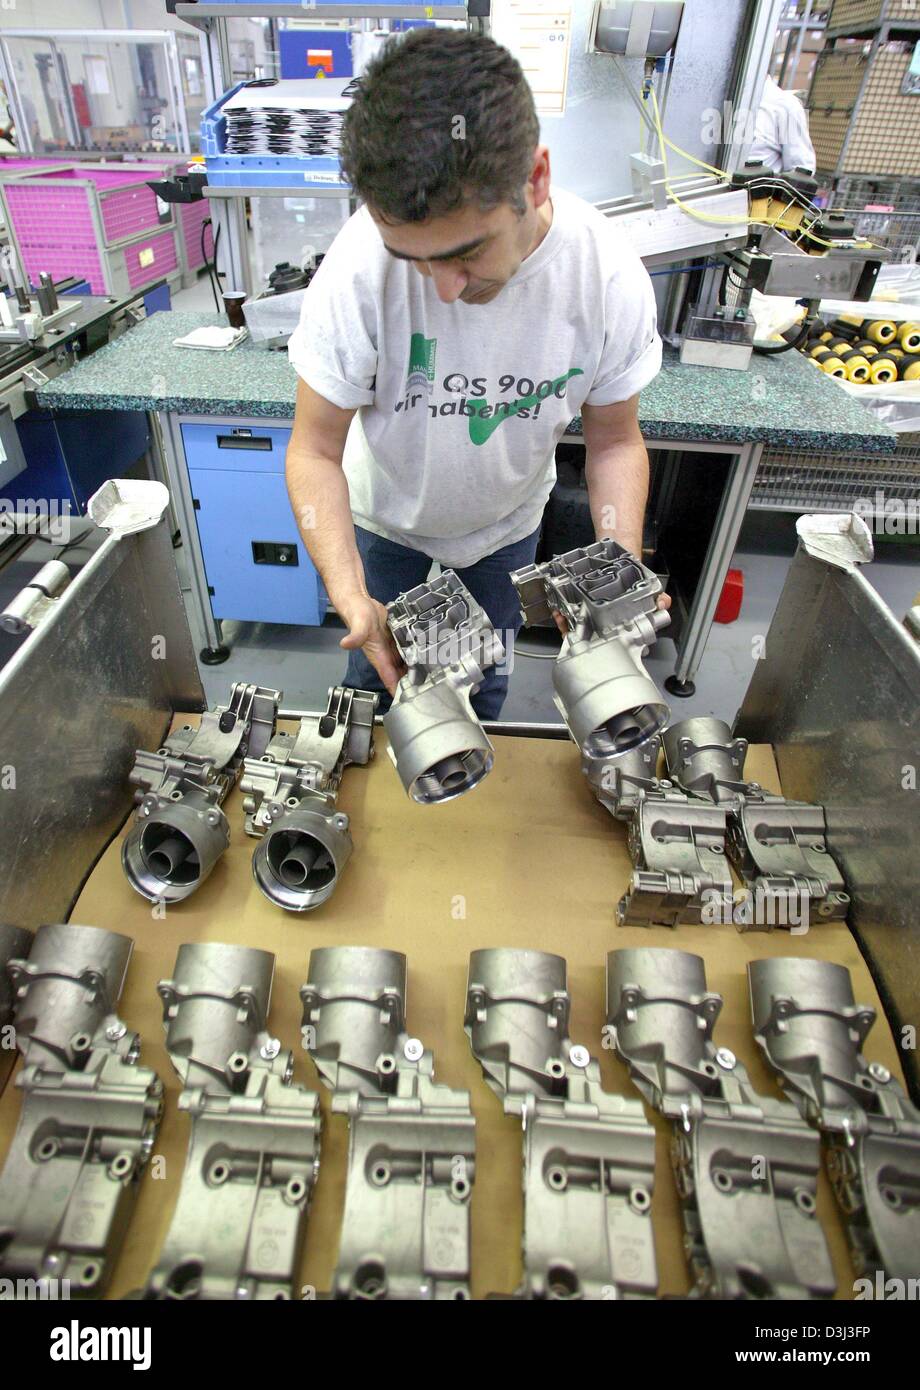 dpa - An employee shows oil housings, which are used for car production, at the Mann+Hummel car part supplier in Ludwigsburg, Germany, 26 May 2003. 'Mann and Hummel' is among